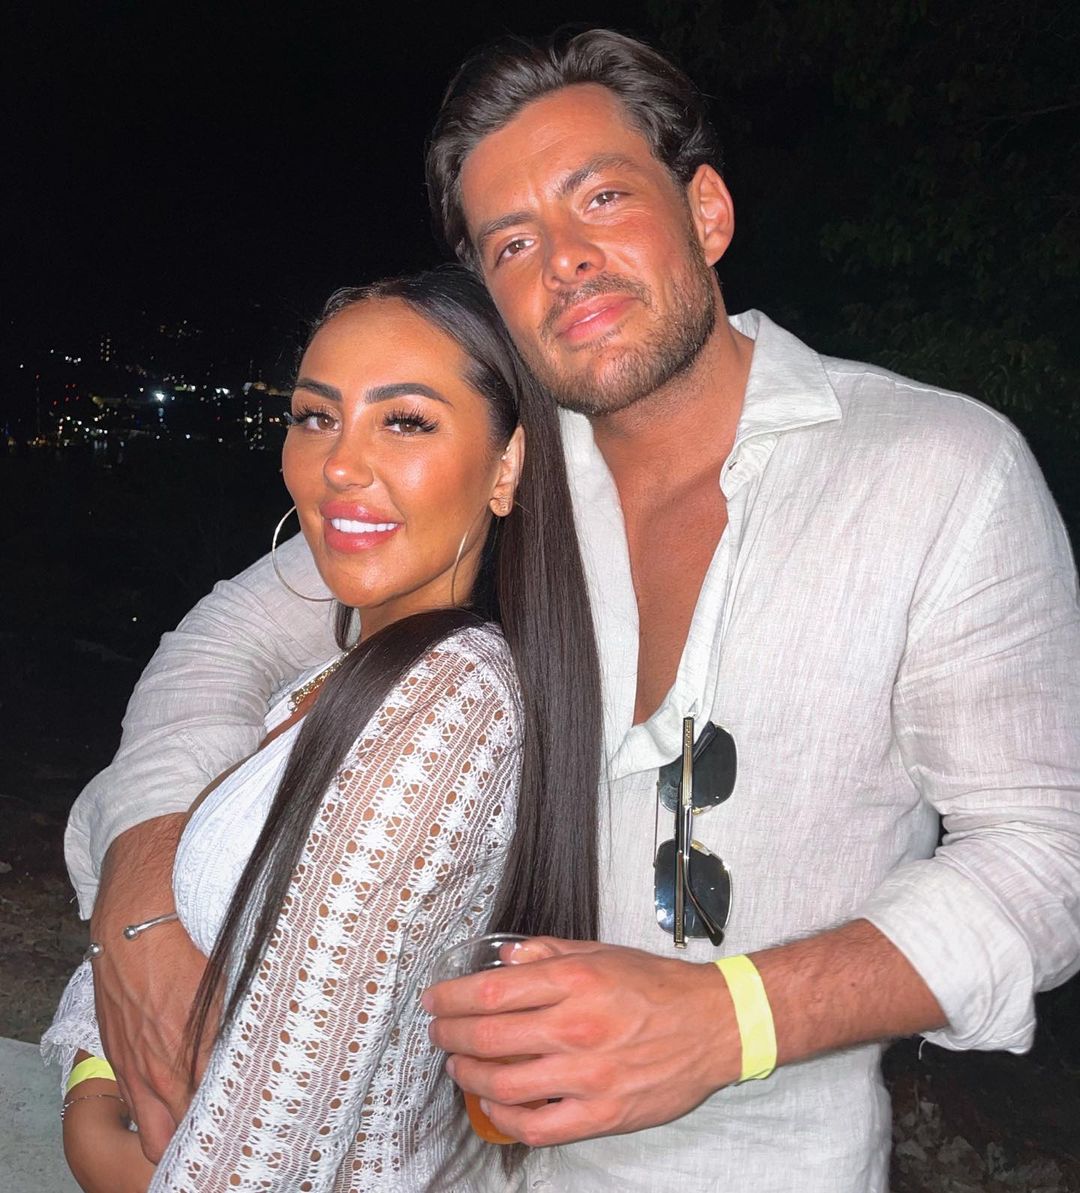 Towie star joins Geordie Shore as cast film in Greece for first ever reality TV star swap